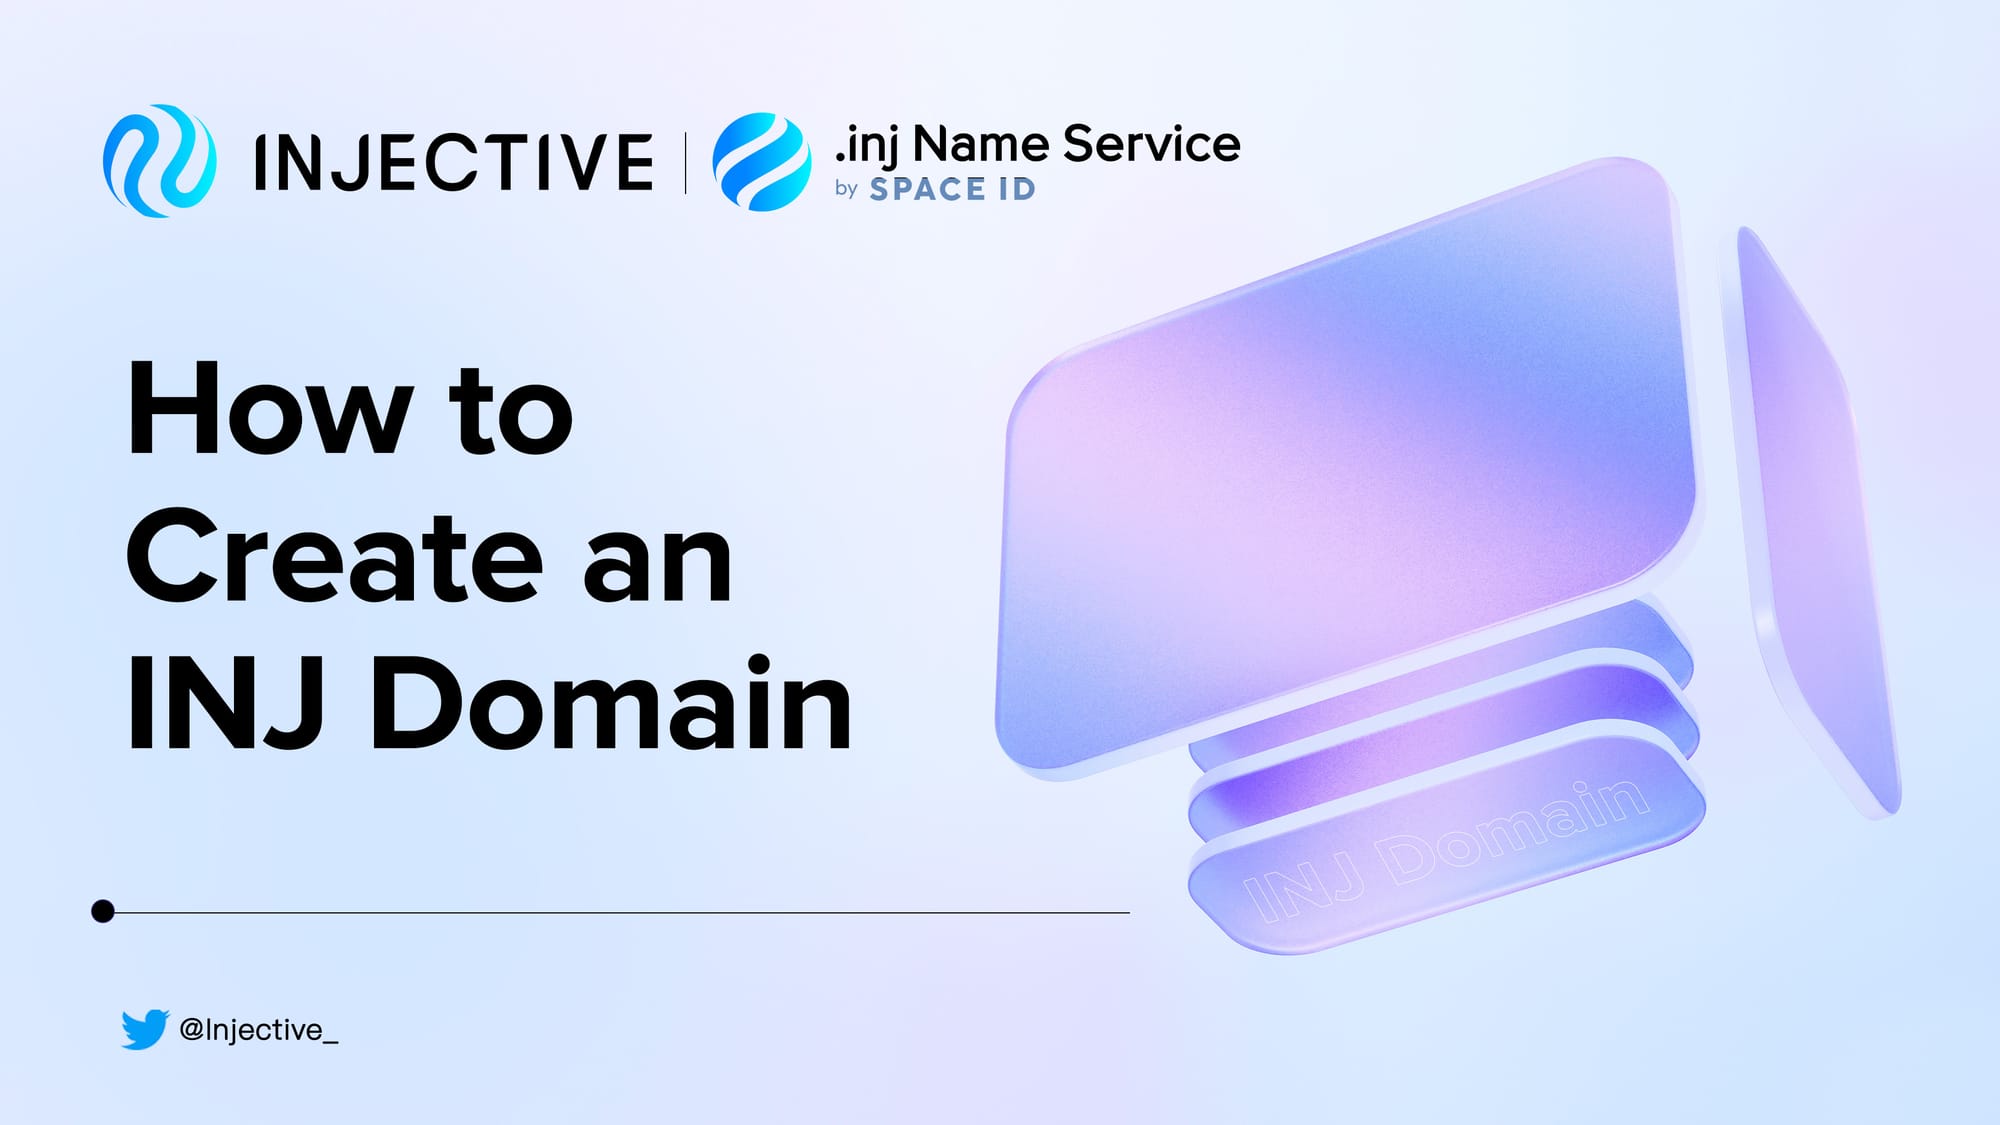 How to Register a .inj Domain